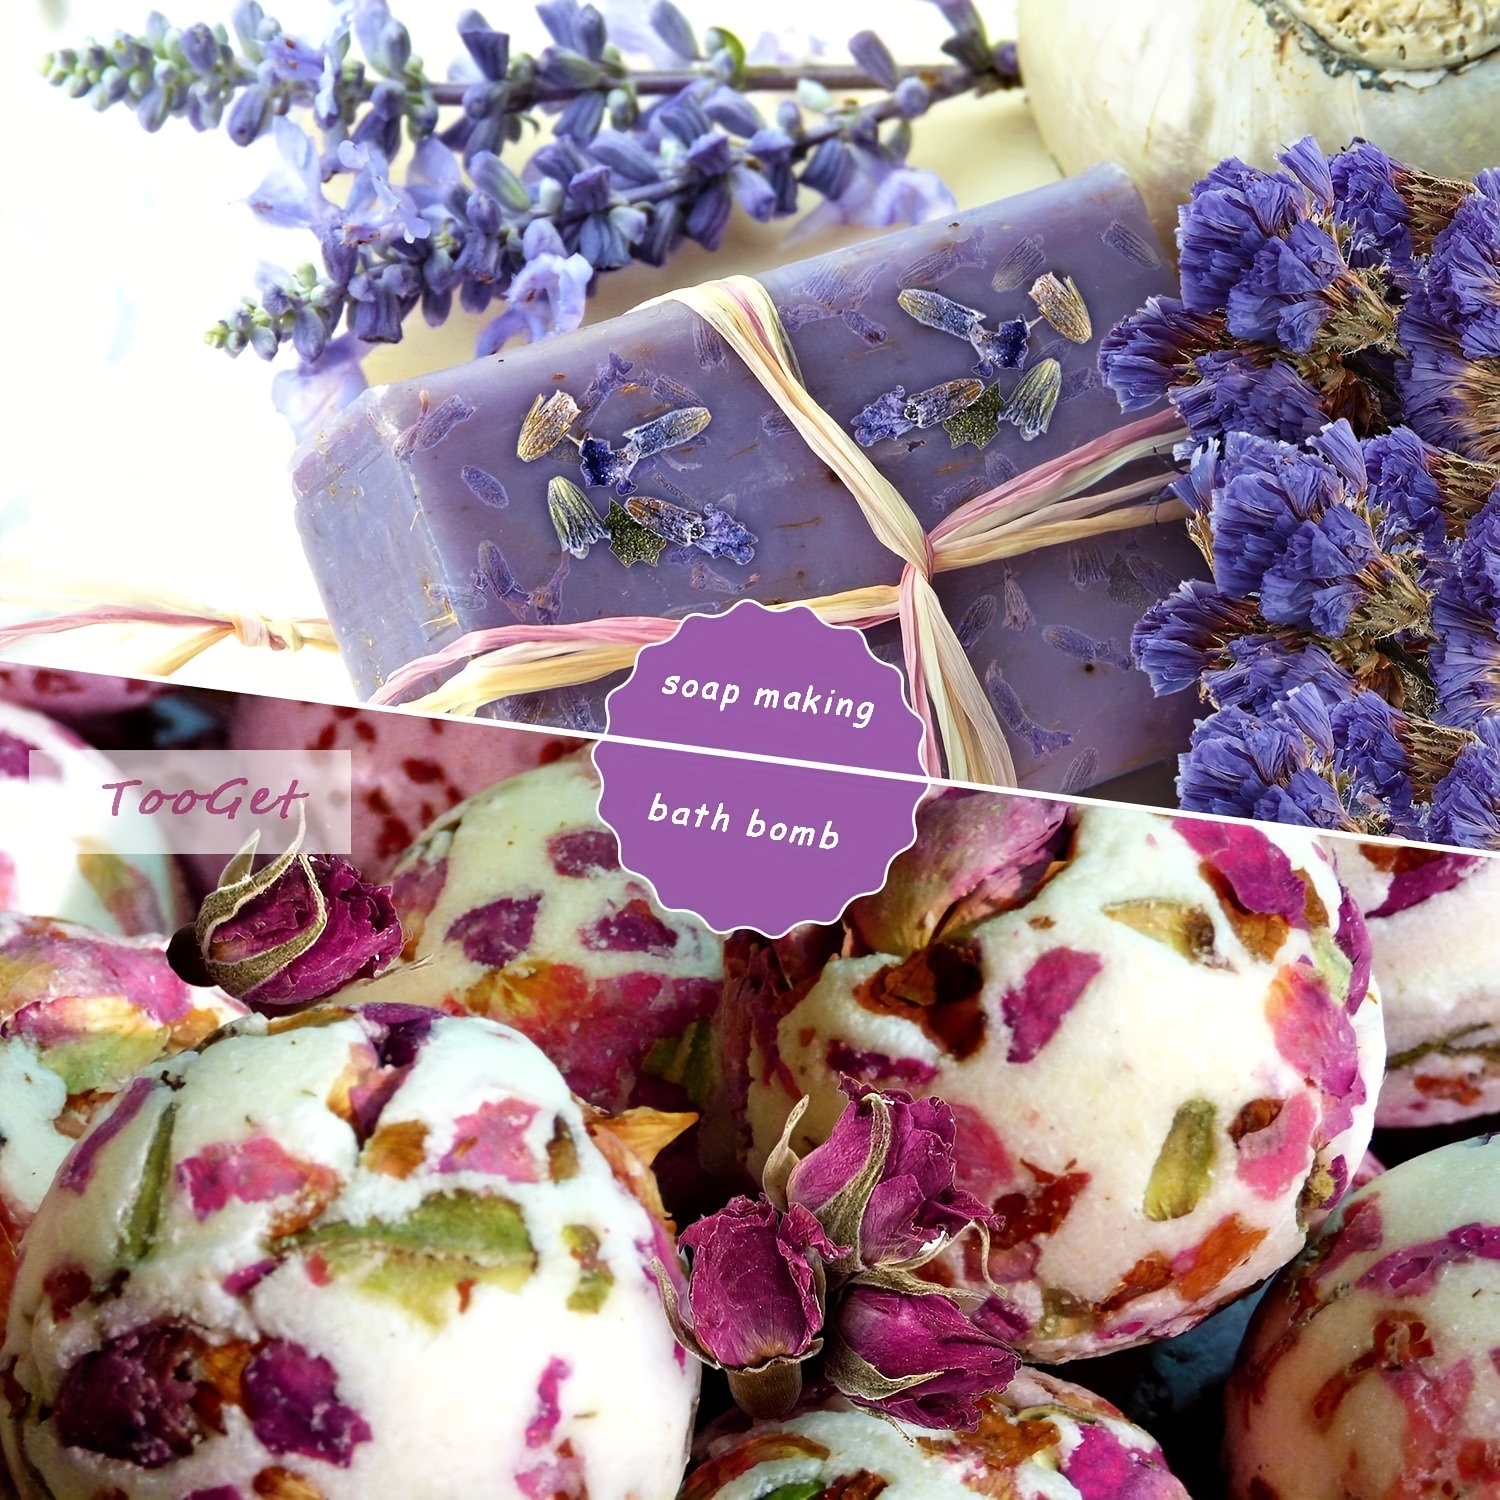 Dried Flowers And Herbs For Soap Making - 18 Varieties Rose Buds Jasmine  Lavender Dry Flower Petals - Lip Gloss Witchcraft Supplies Resin Jewelry  Essential Oils For Candle Crafts Nail Art Bath